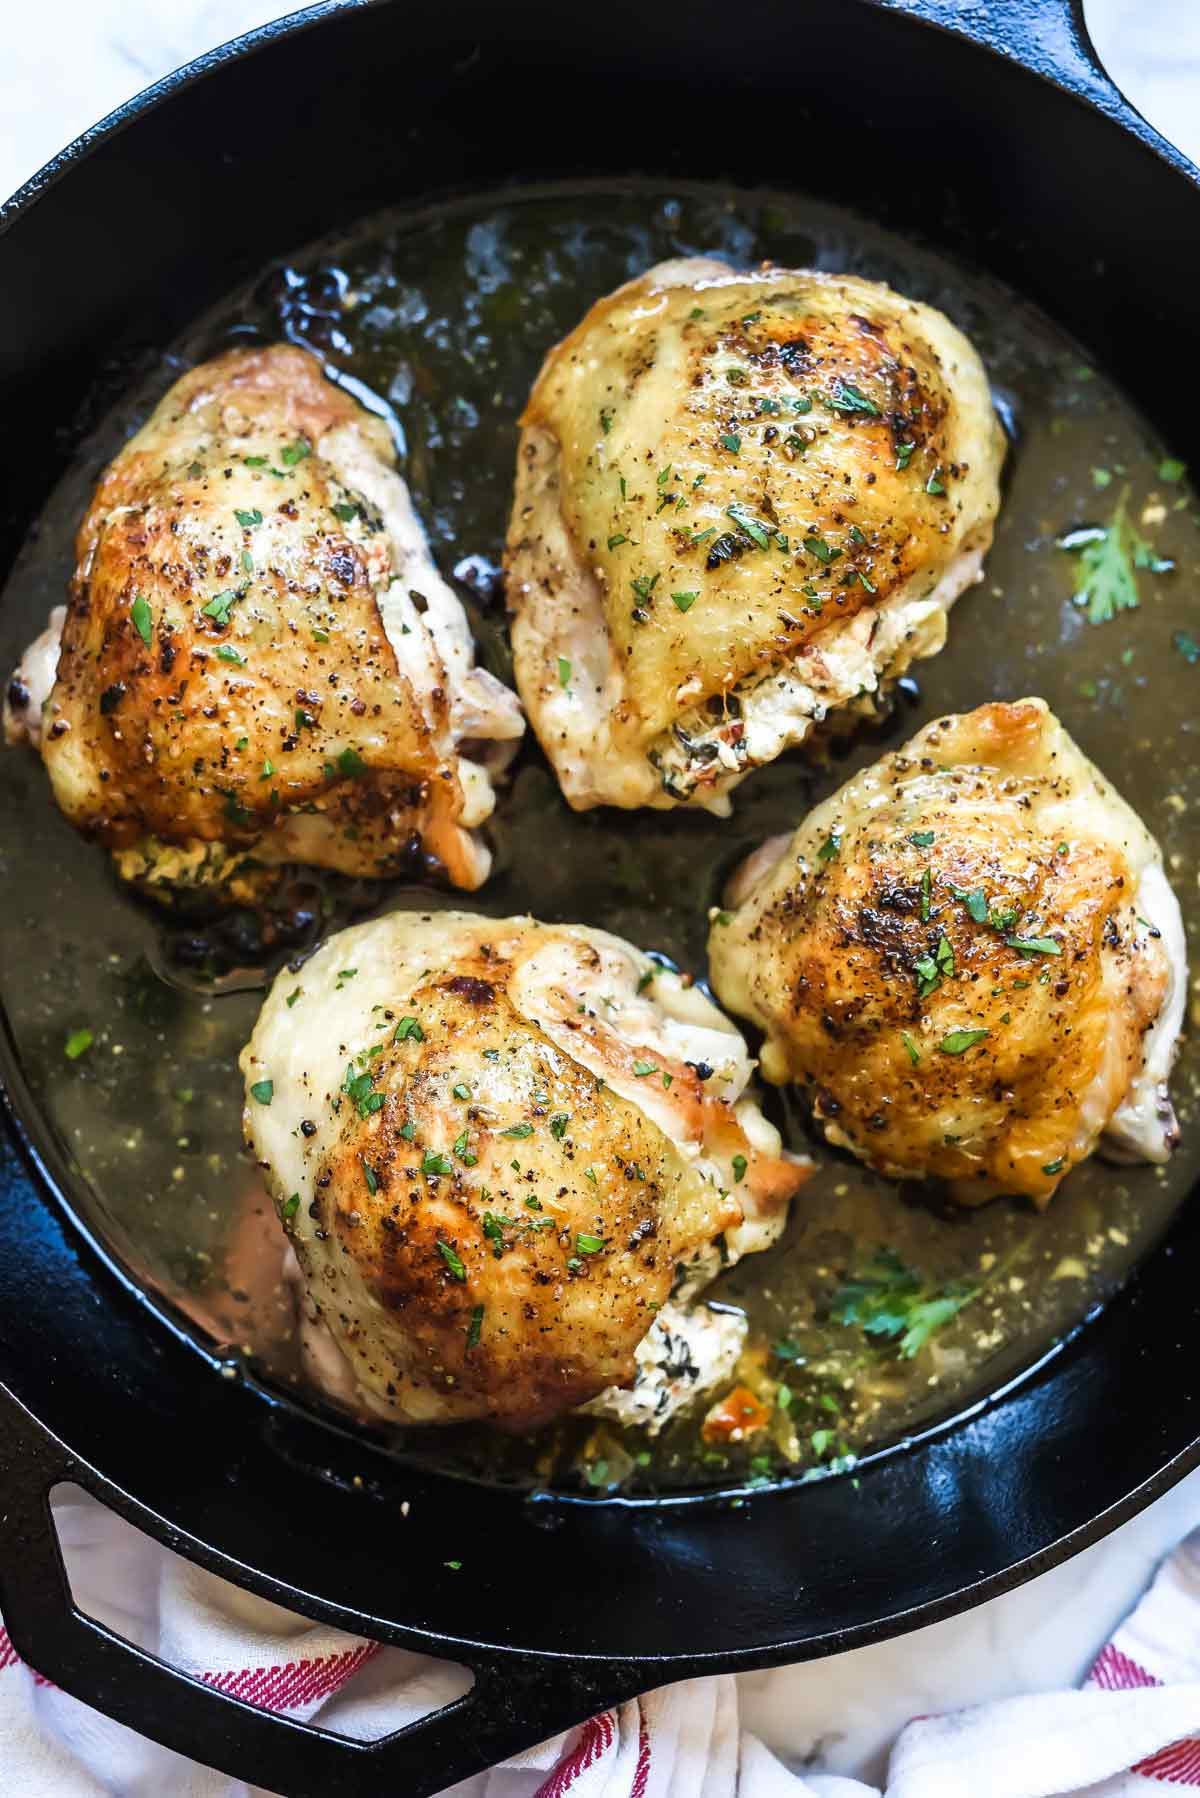 Recipes Using Chicken Thighs
 Stuffed Chicken Thighs with Spinach and Goat Cheese